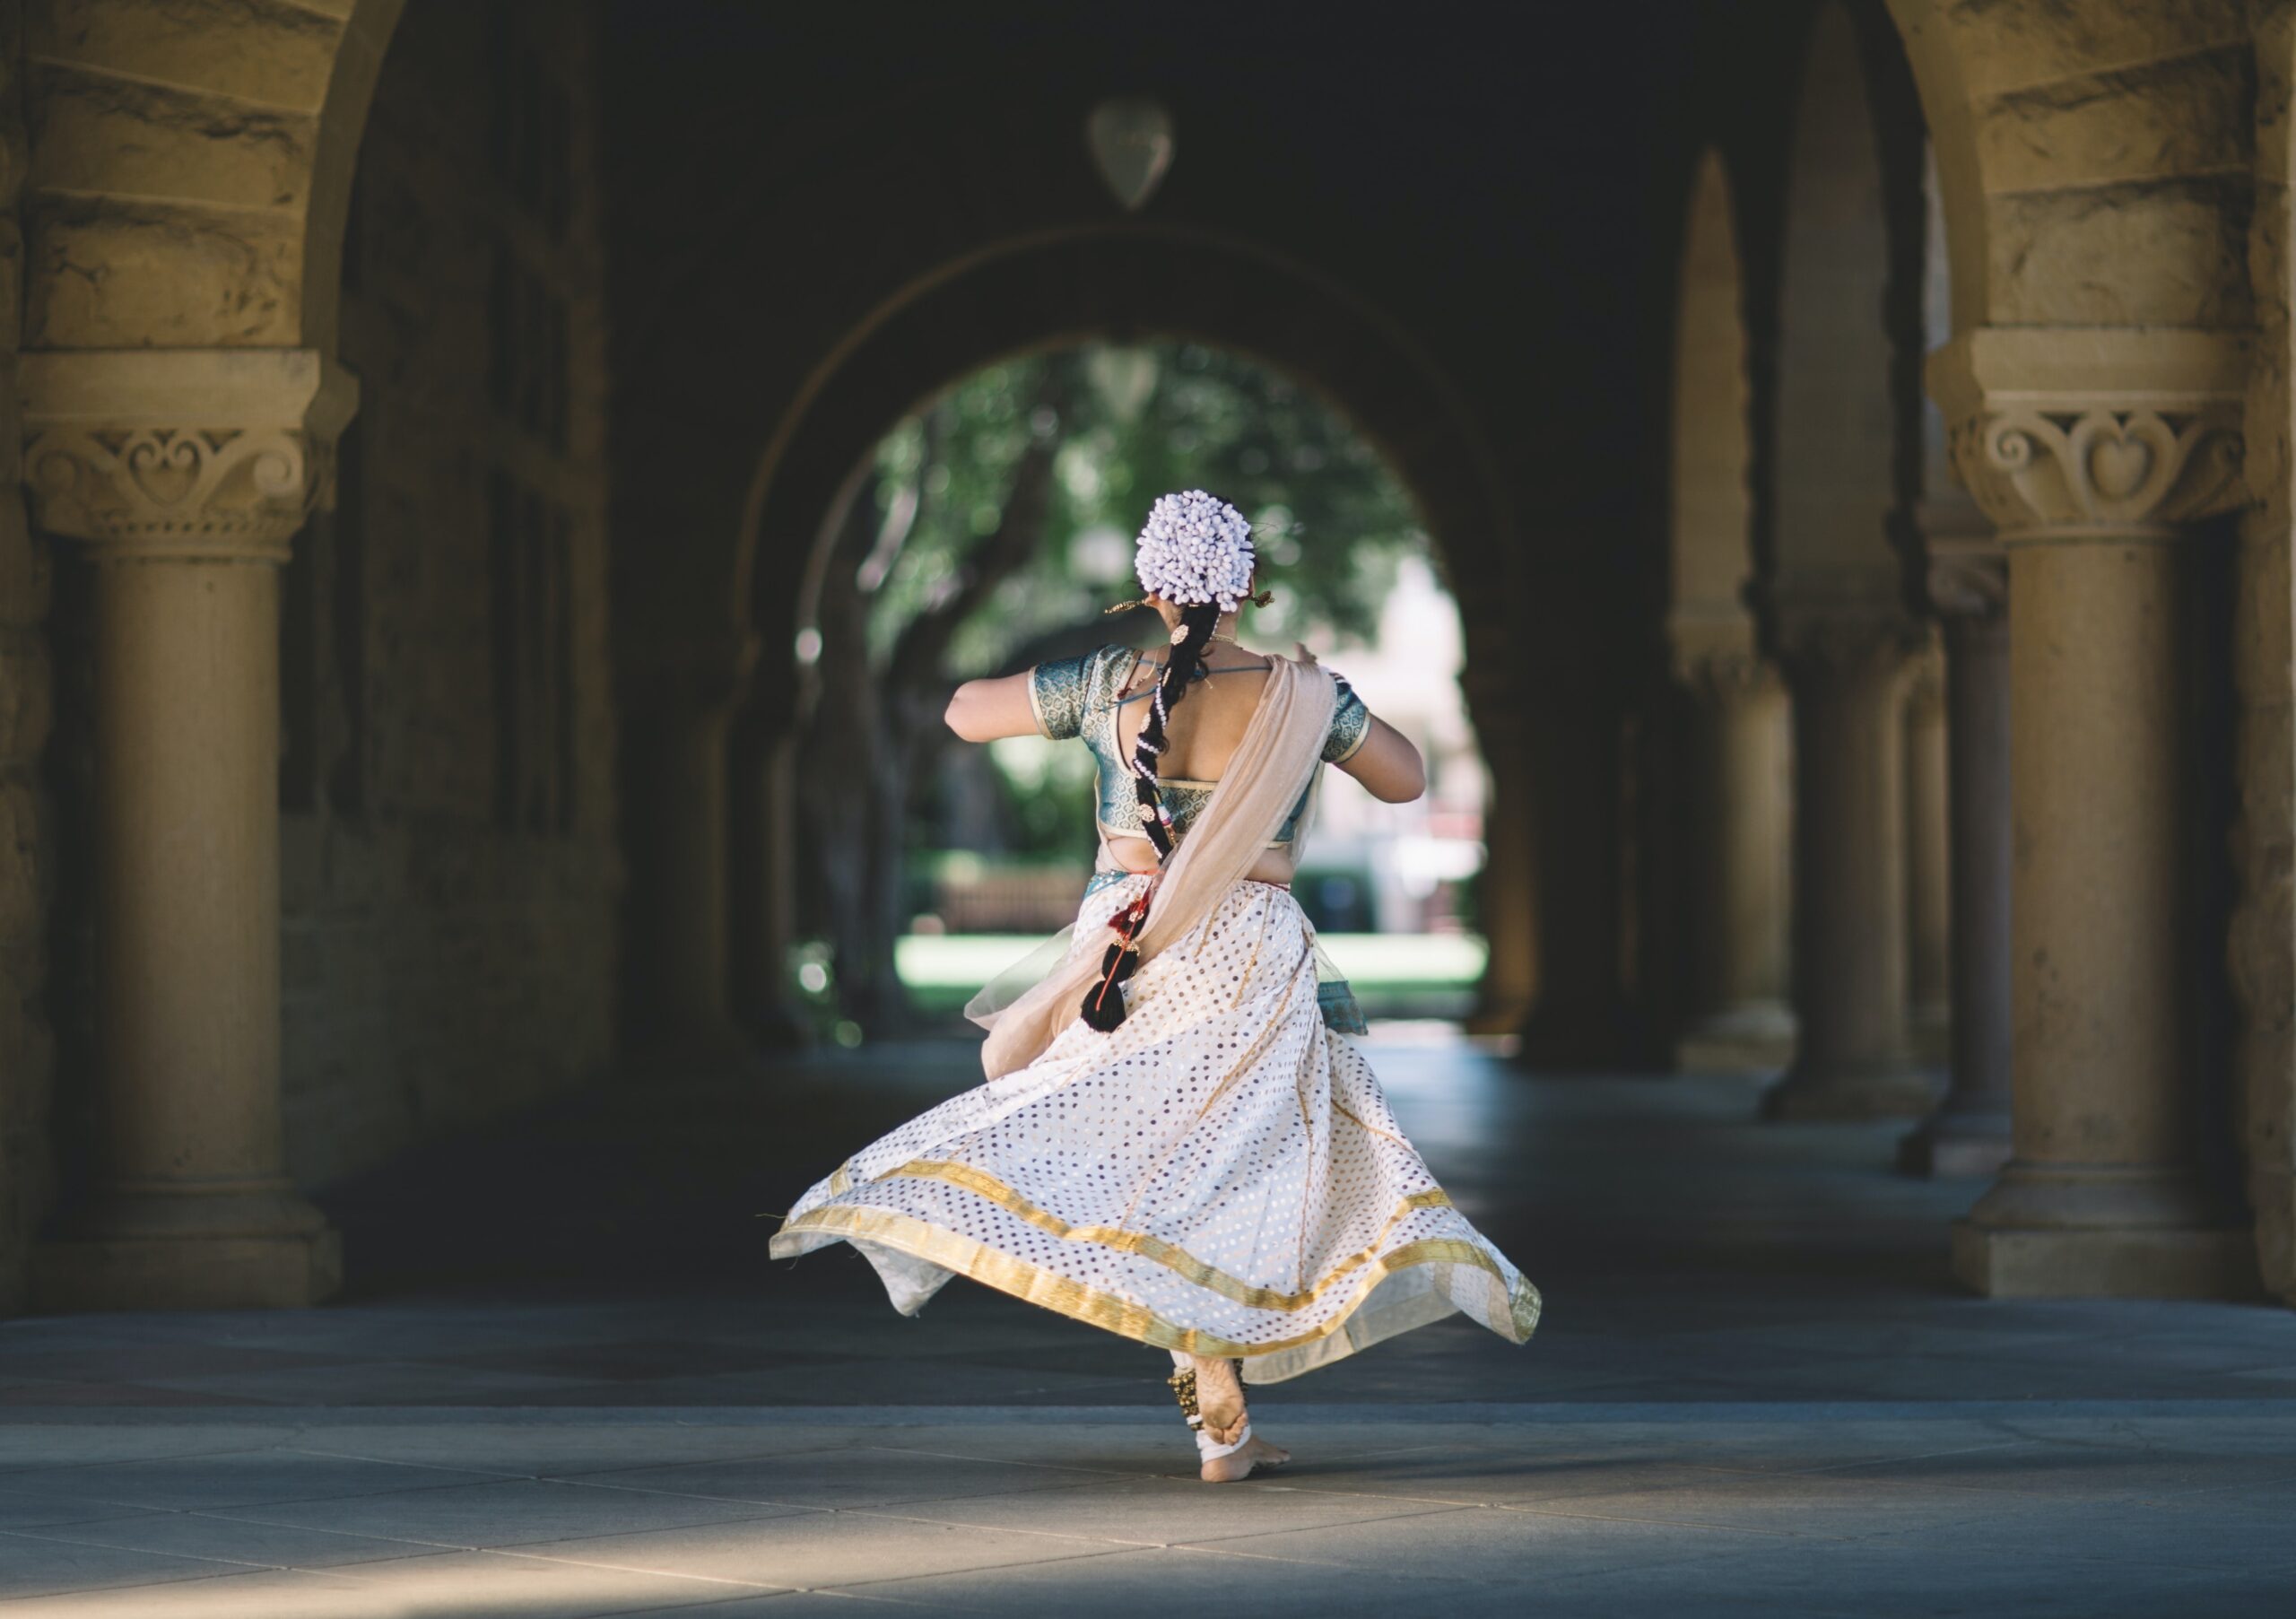 a girl in beautiful dress dancing and reminding expanding happiness horizons beyond your own culture.